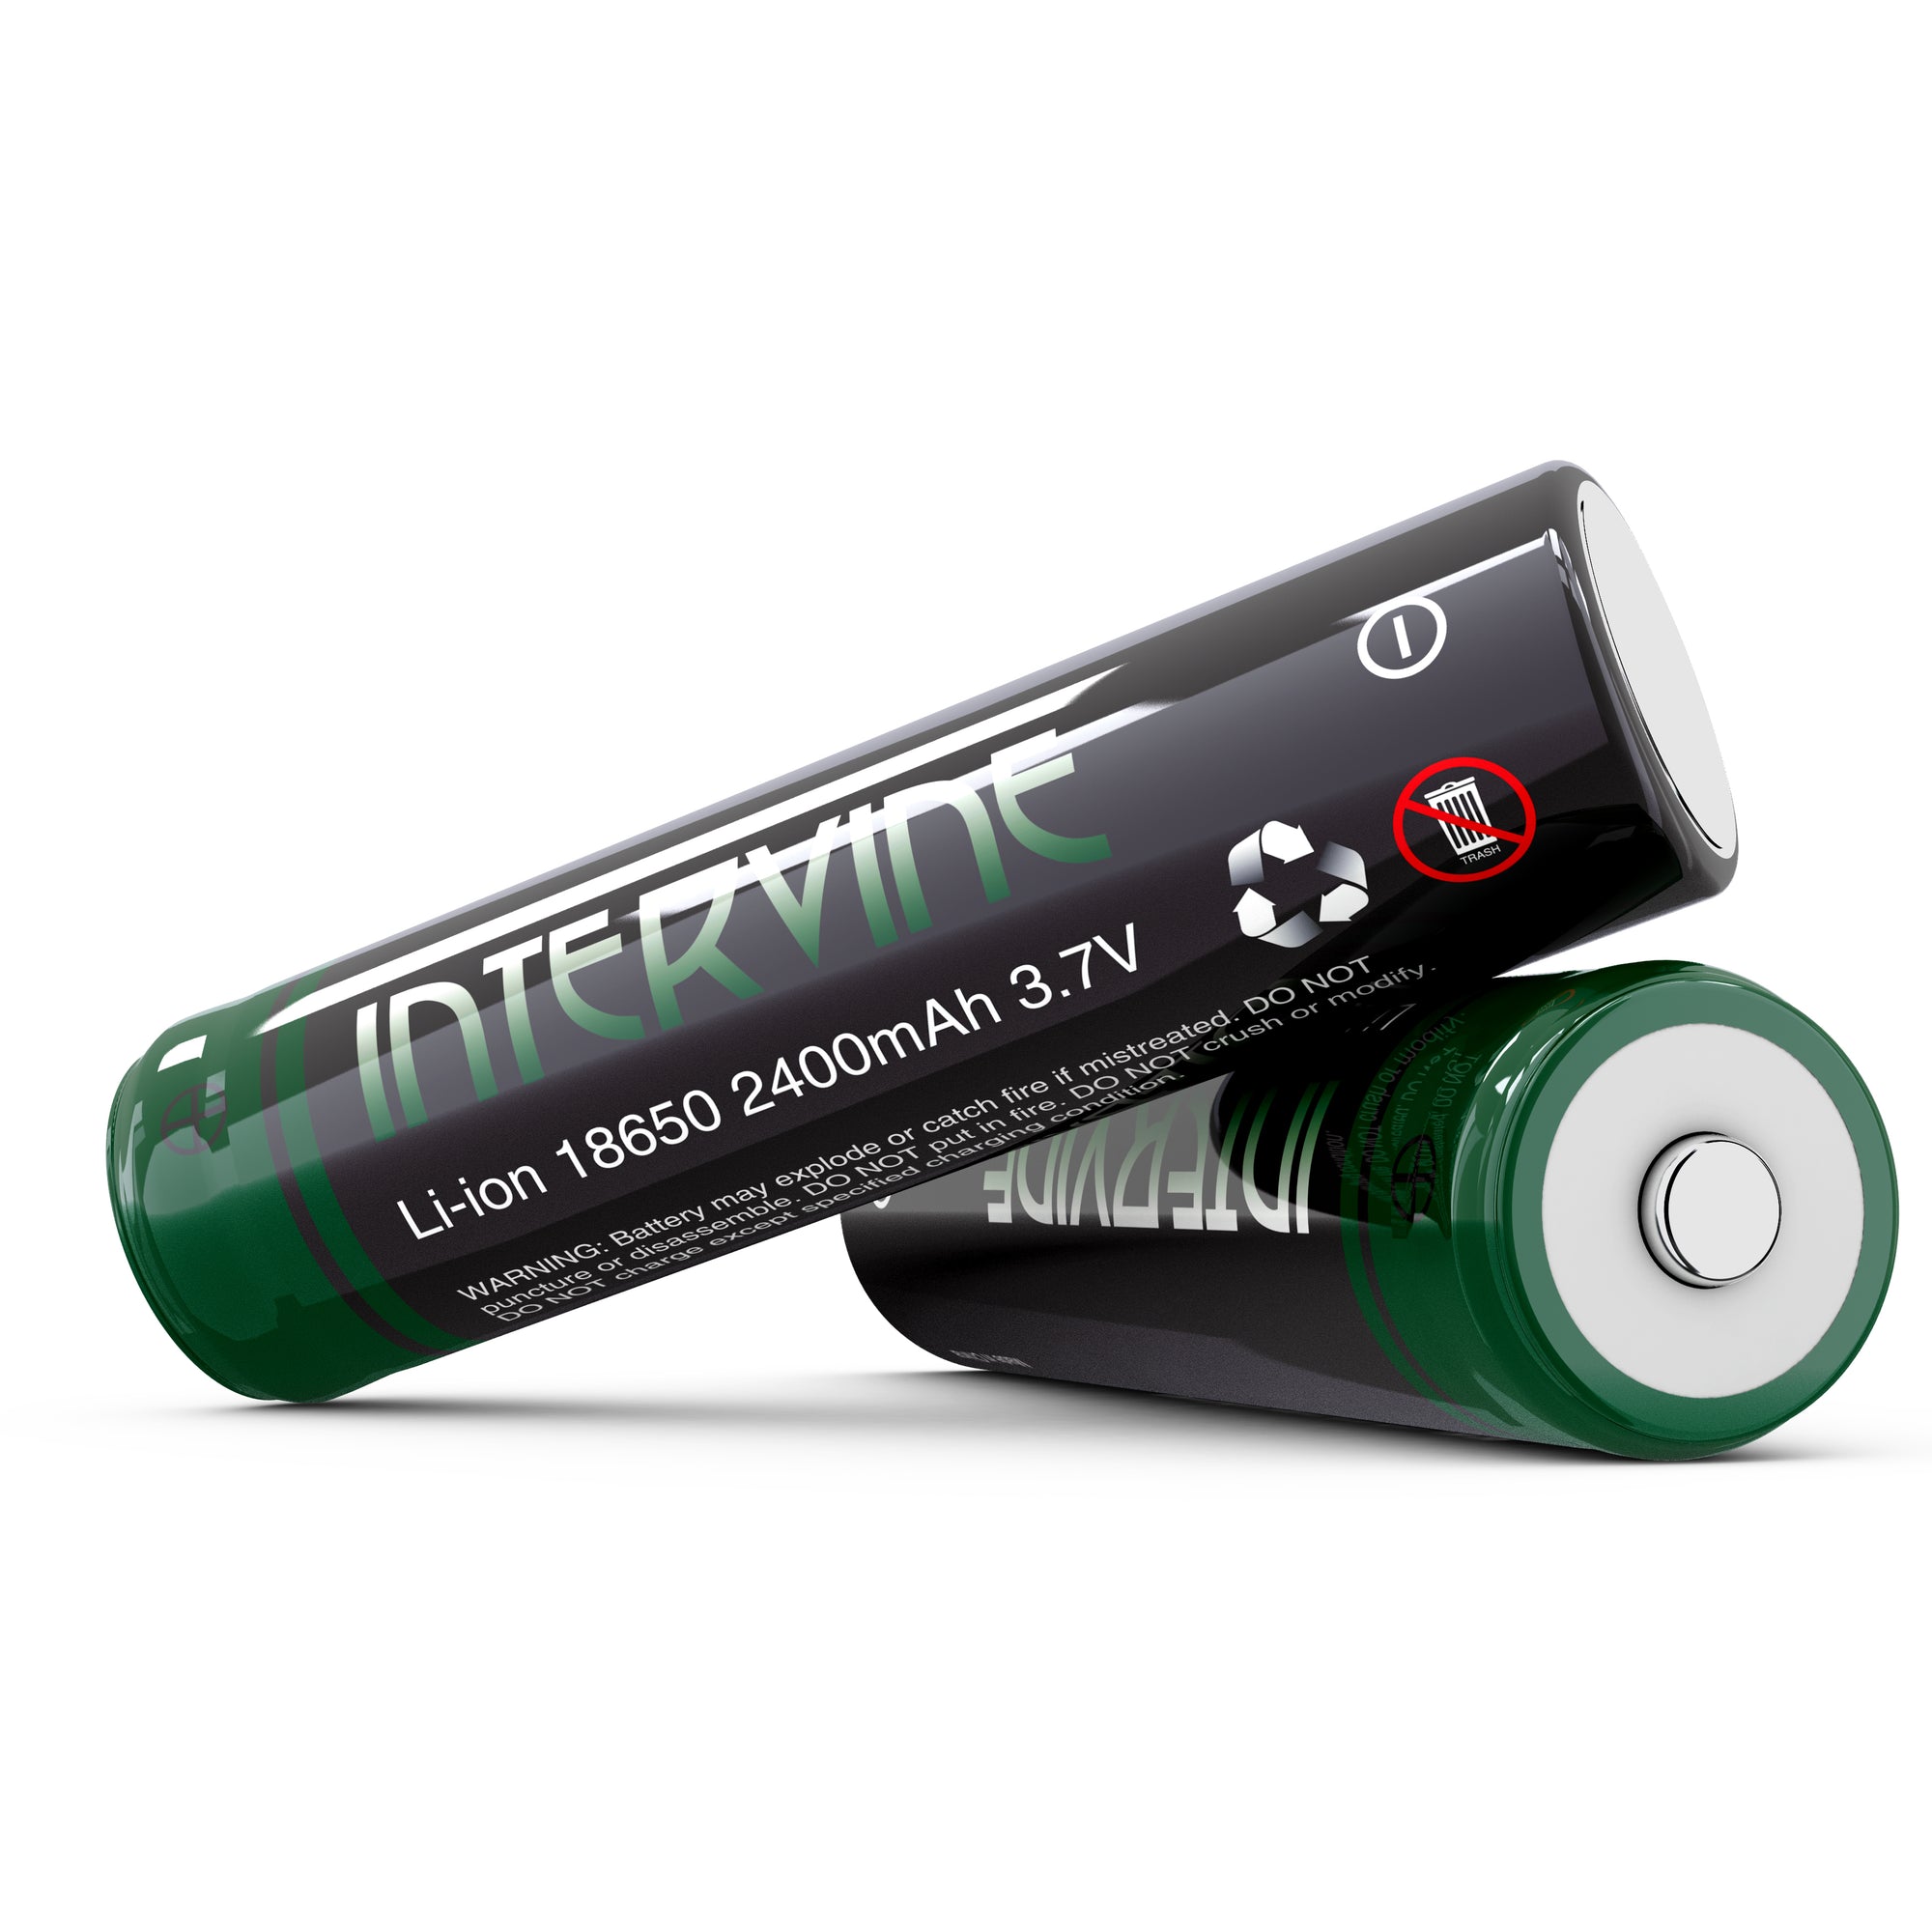 Intervine 2400 Mah Rechargeable 18650 Lithium Ion Batteries - 2 Pack